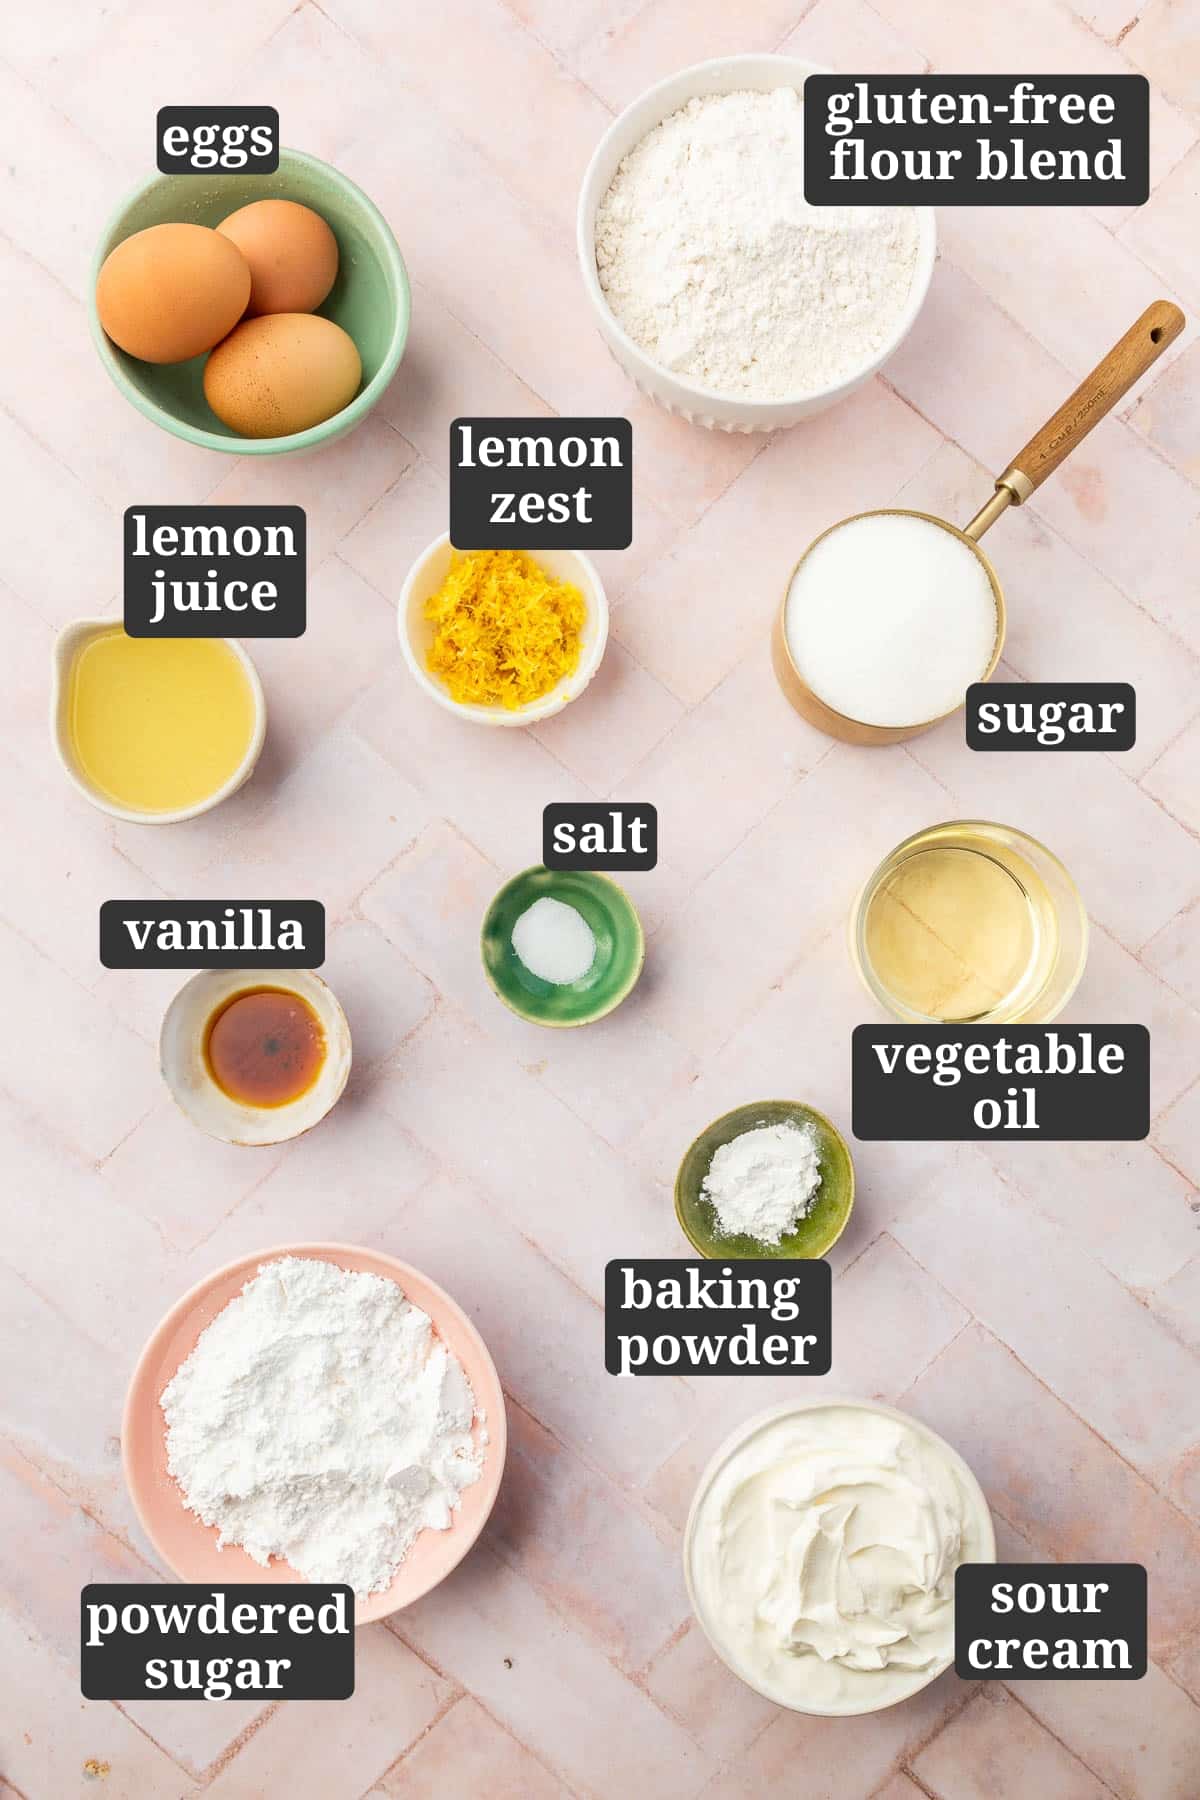 An overhead view of ingredients in small bowls to make gluten-free lemon drizzle cake, including, eggs, gluten-free flour, lemon juice, lemon zest, sugar, vanilla, salt, vegetable oil, baking powder, powdered sugar and sour cream with text overlays over each ingredient.